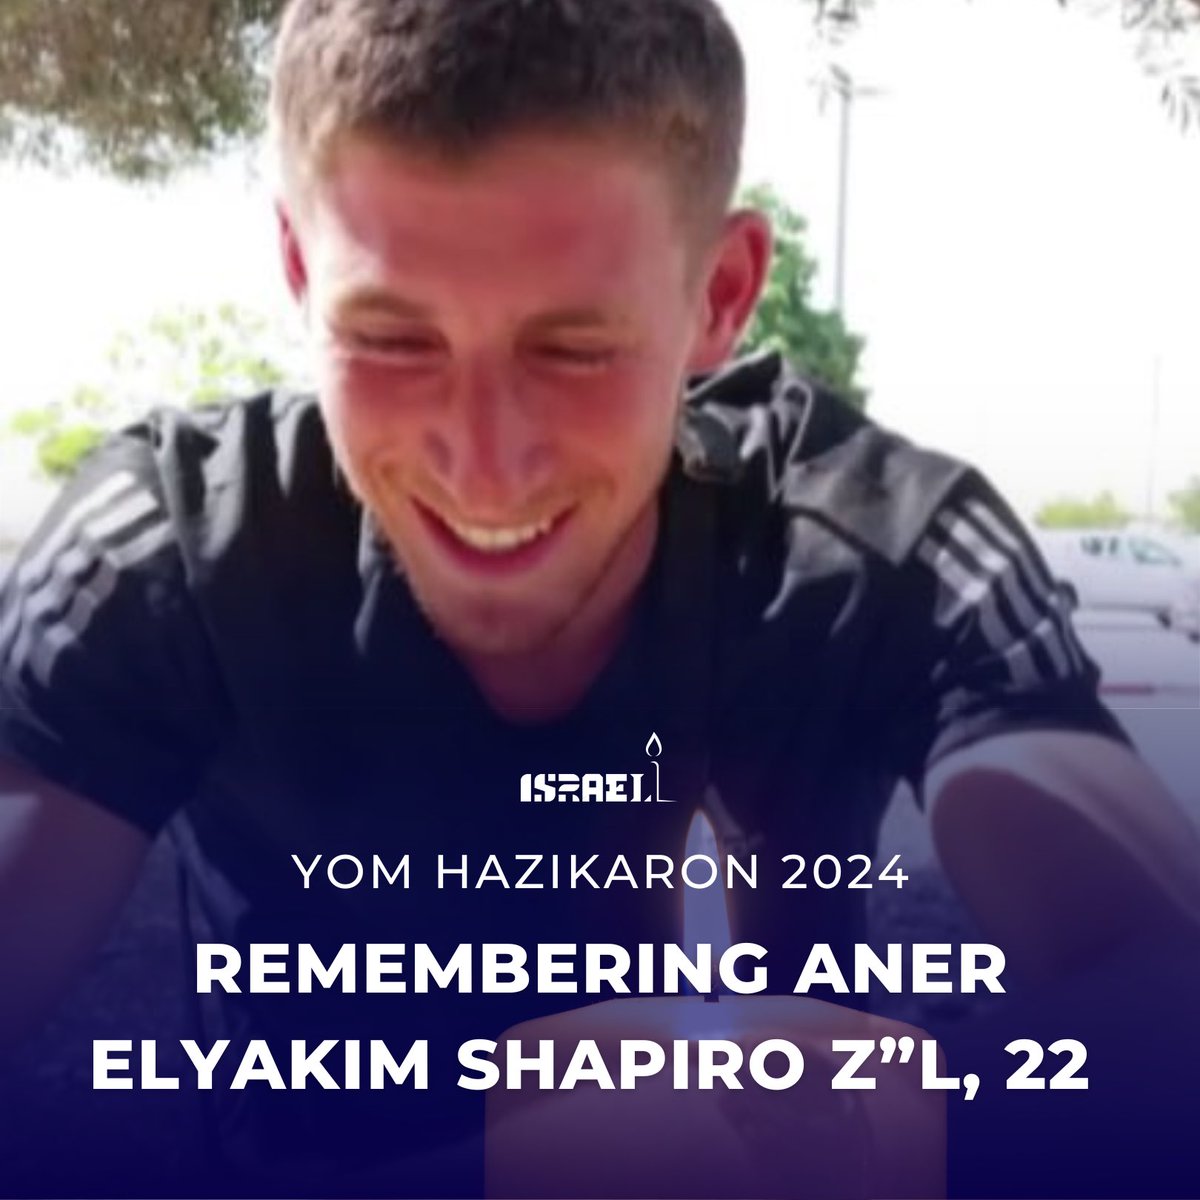 Aner Elyakim Shapiro, 22, was at the Nova Music Festival when Hamas terrorists started gunning down innocents. When terrorists started tossing grenades at a bomb shelter to kill those inside including Aner, he threw back eight grenades saving many lives. The eighth grenade…